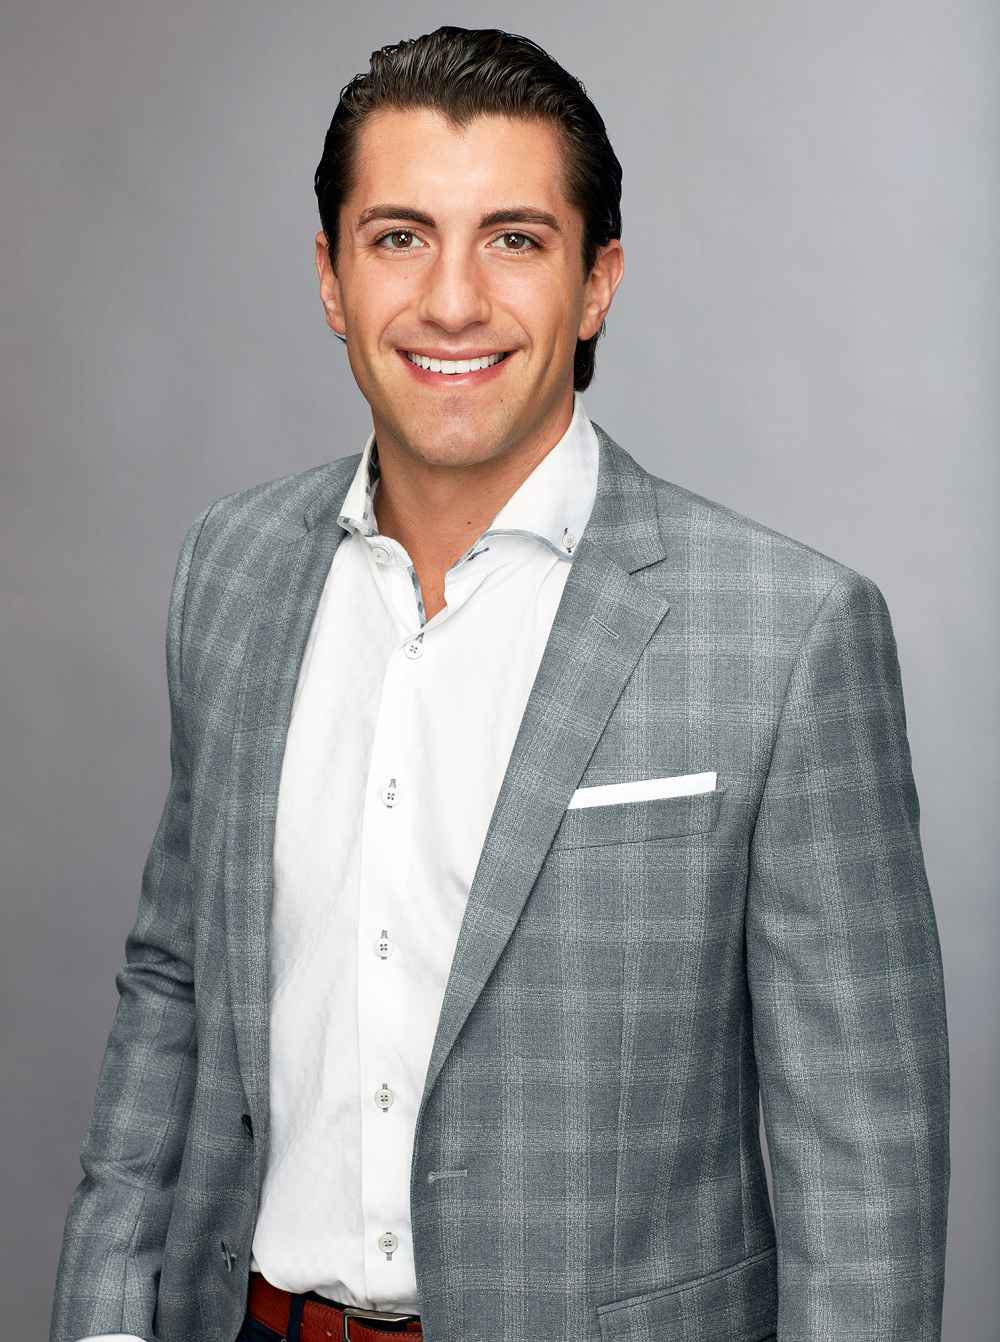 Jason Tartick Says His Bachelor Producer Friends Hear Fans Feedback Loud Clear Amid Controversy